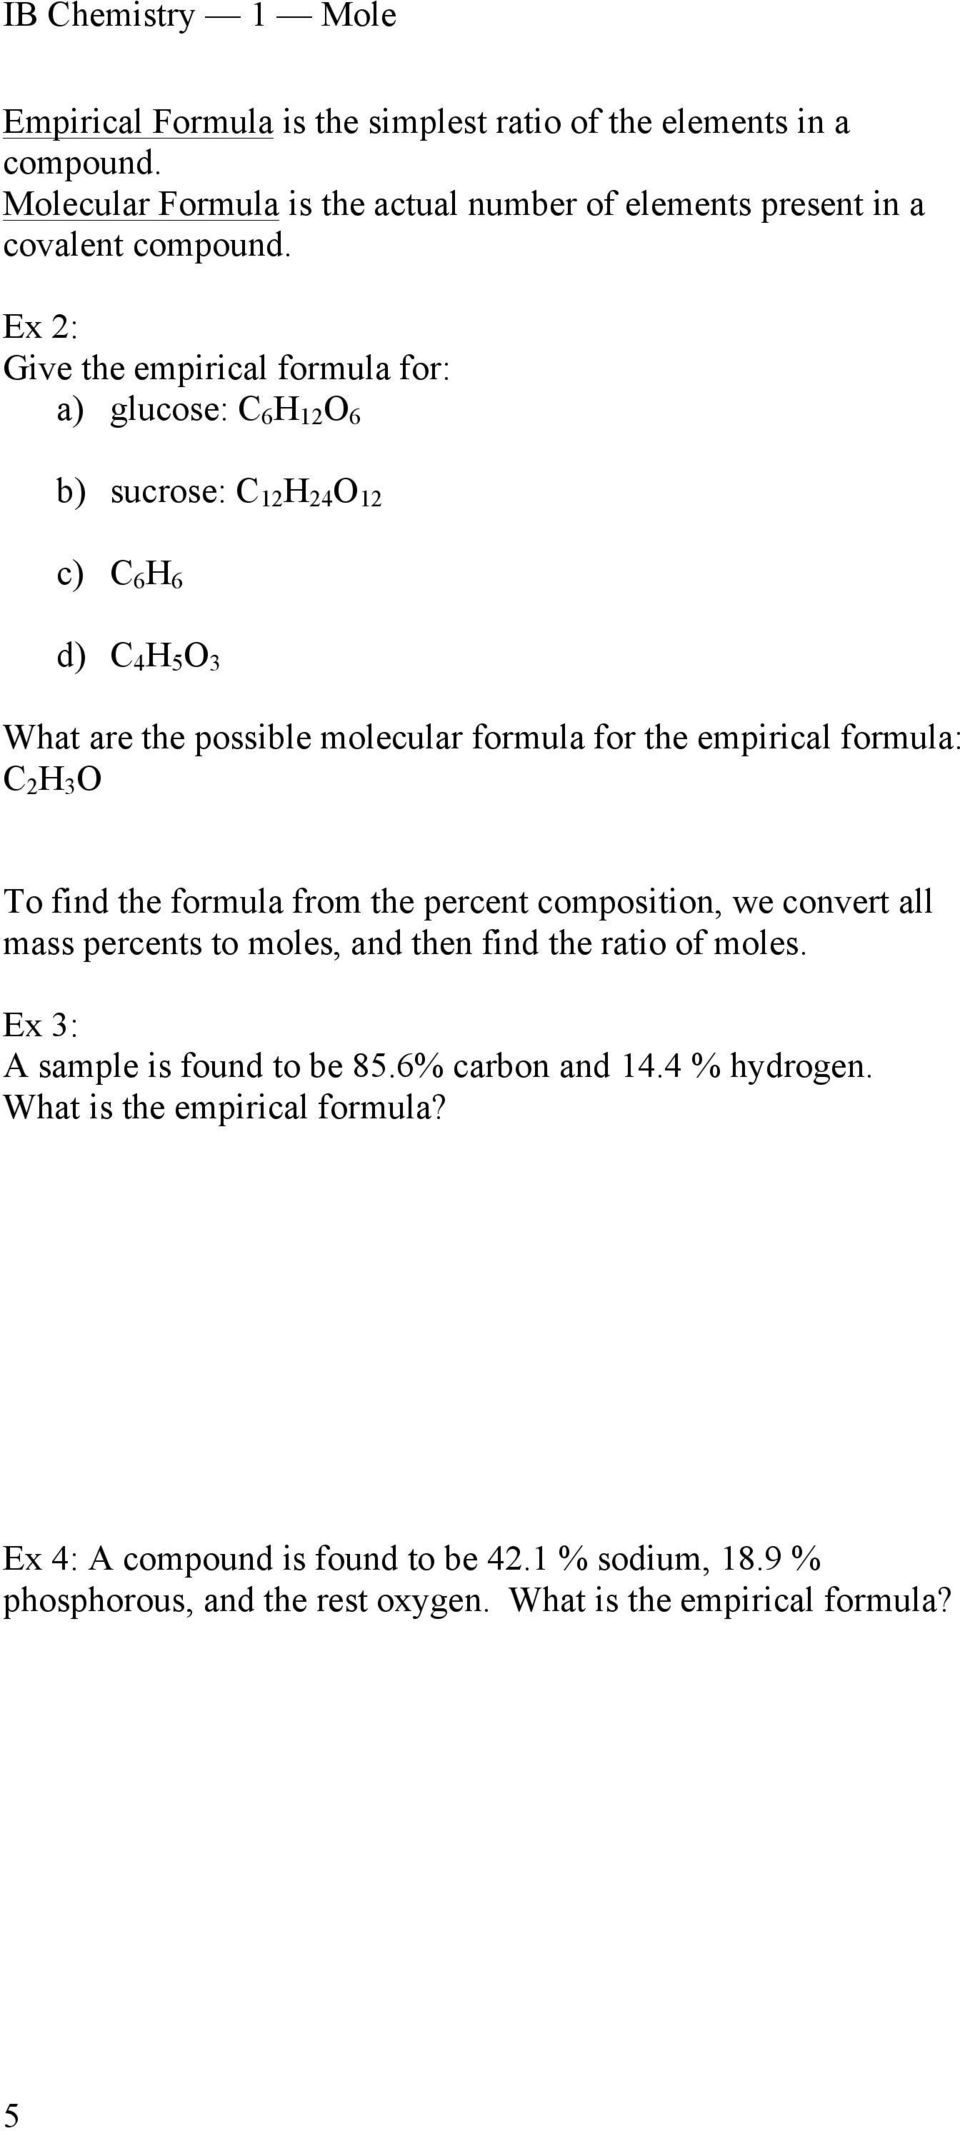 empirical formula: C 2 H 3 O To find the formula from the percent composition, we convert all mass percents to moles, and then find the ratio of moles.